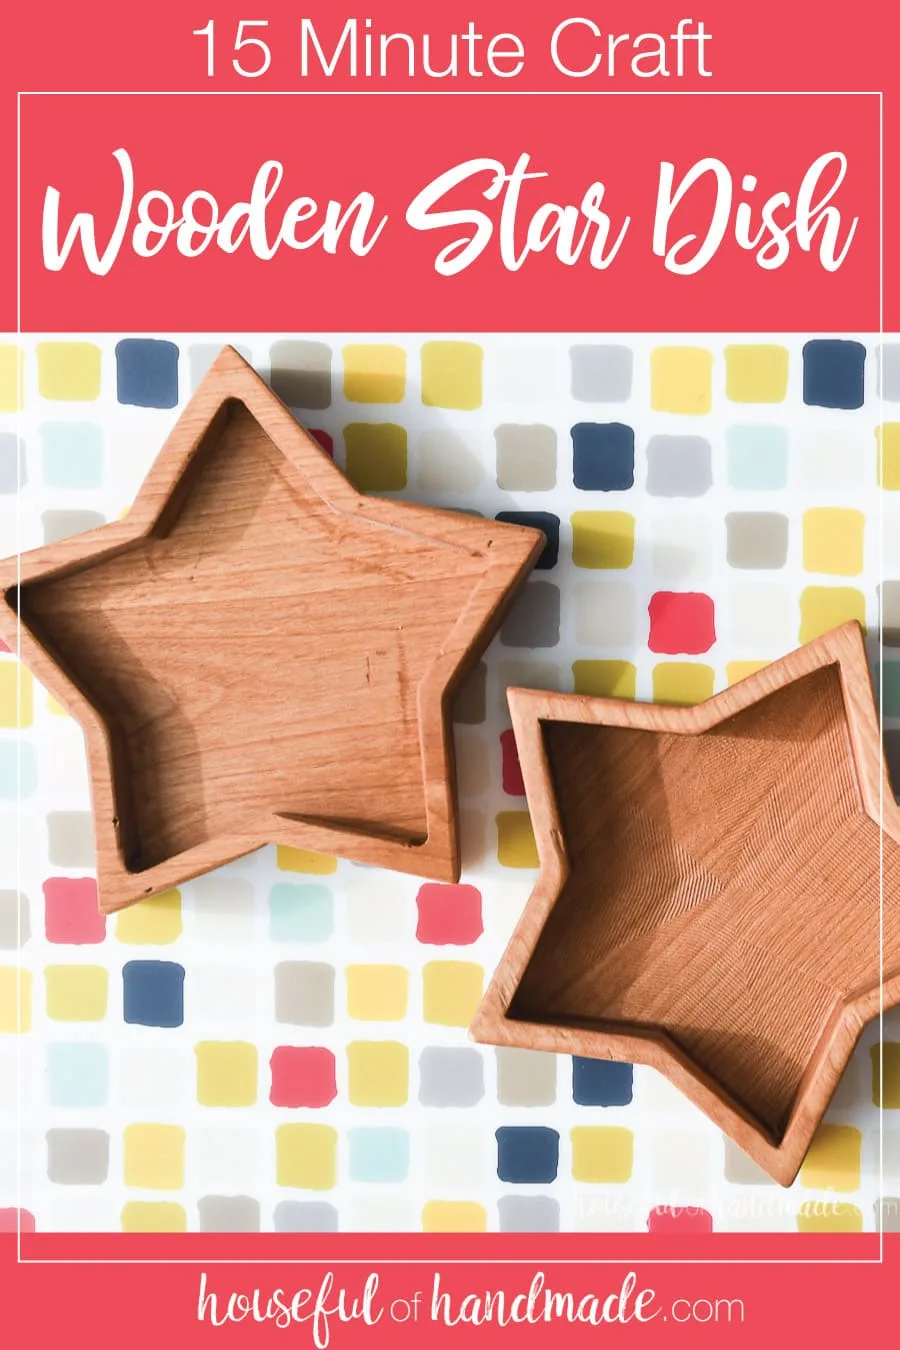 Two wooden star dishes on a background with words